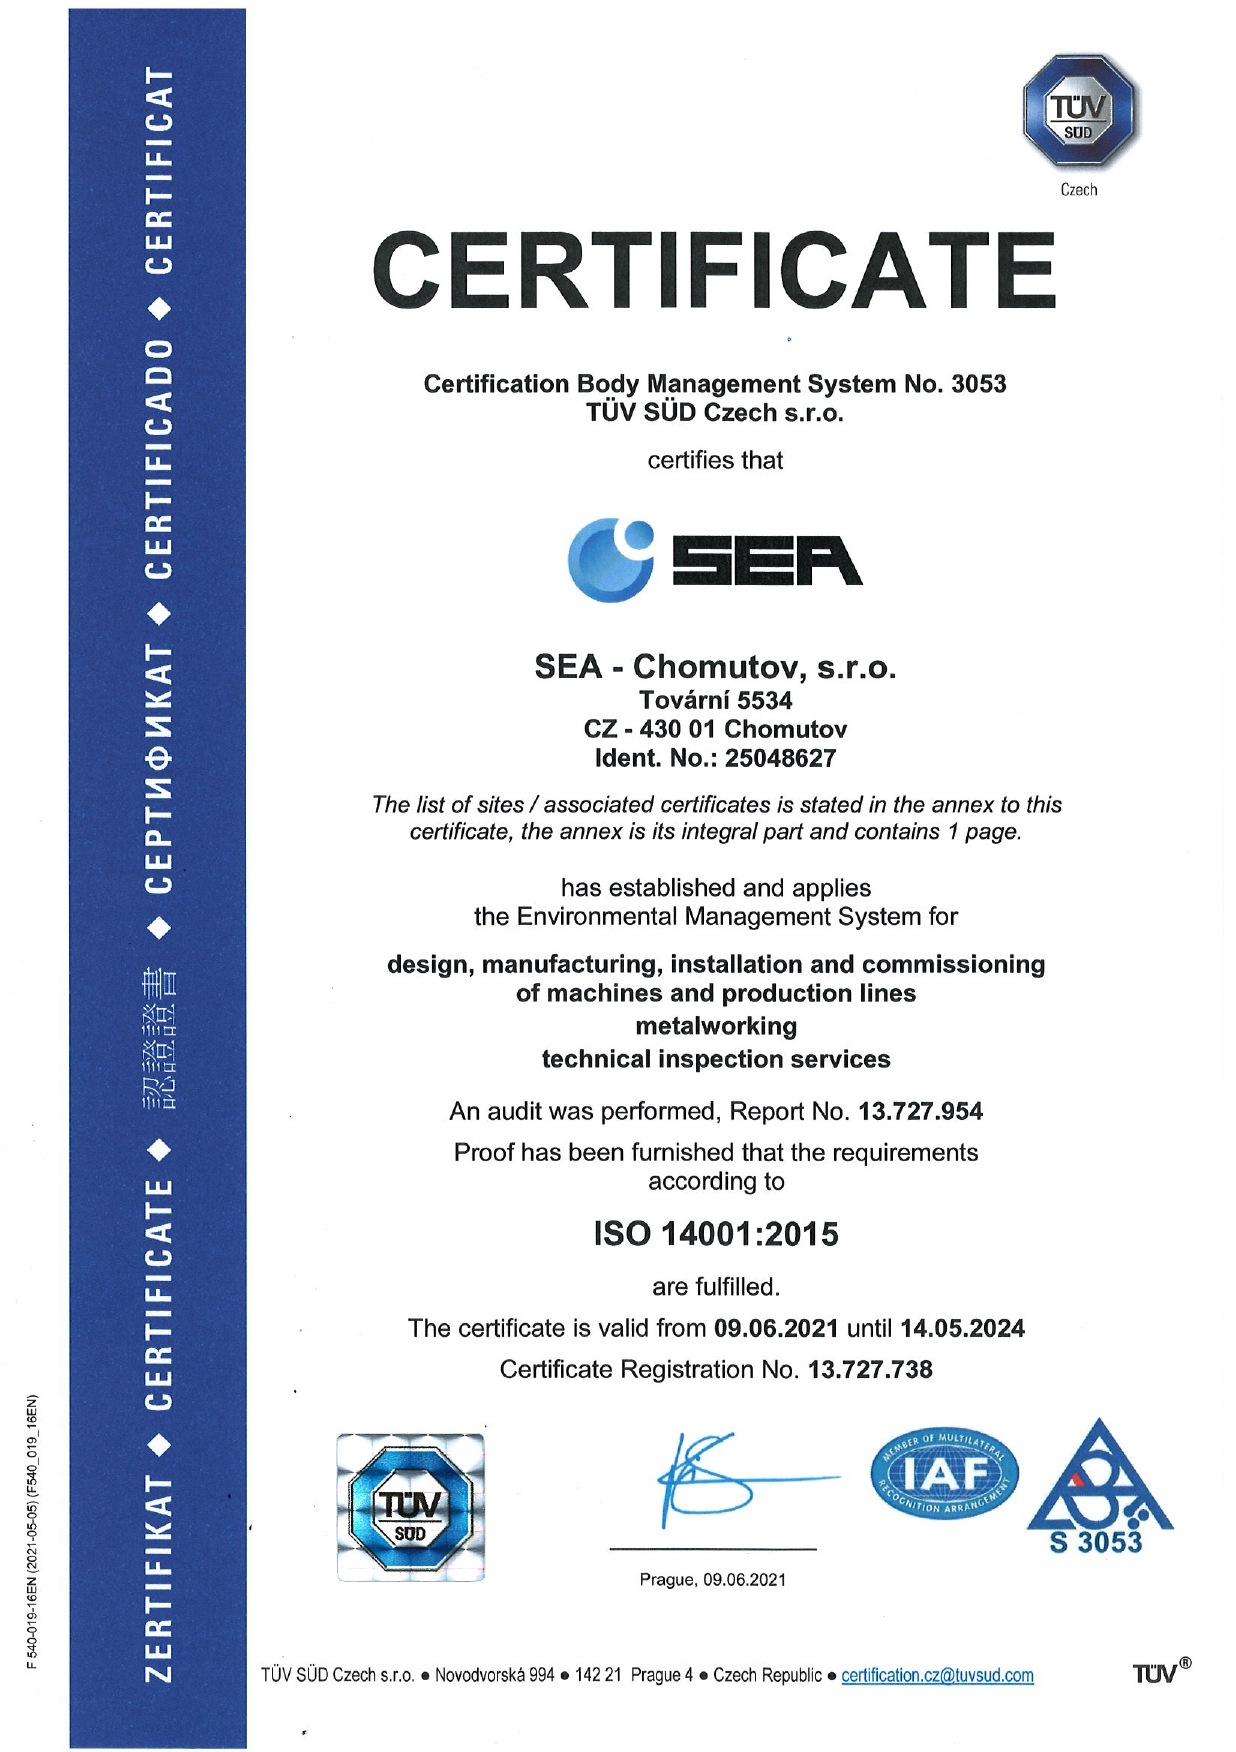 Certificate of Environmental Management System According to EN ISO 14001:2015